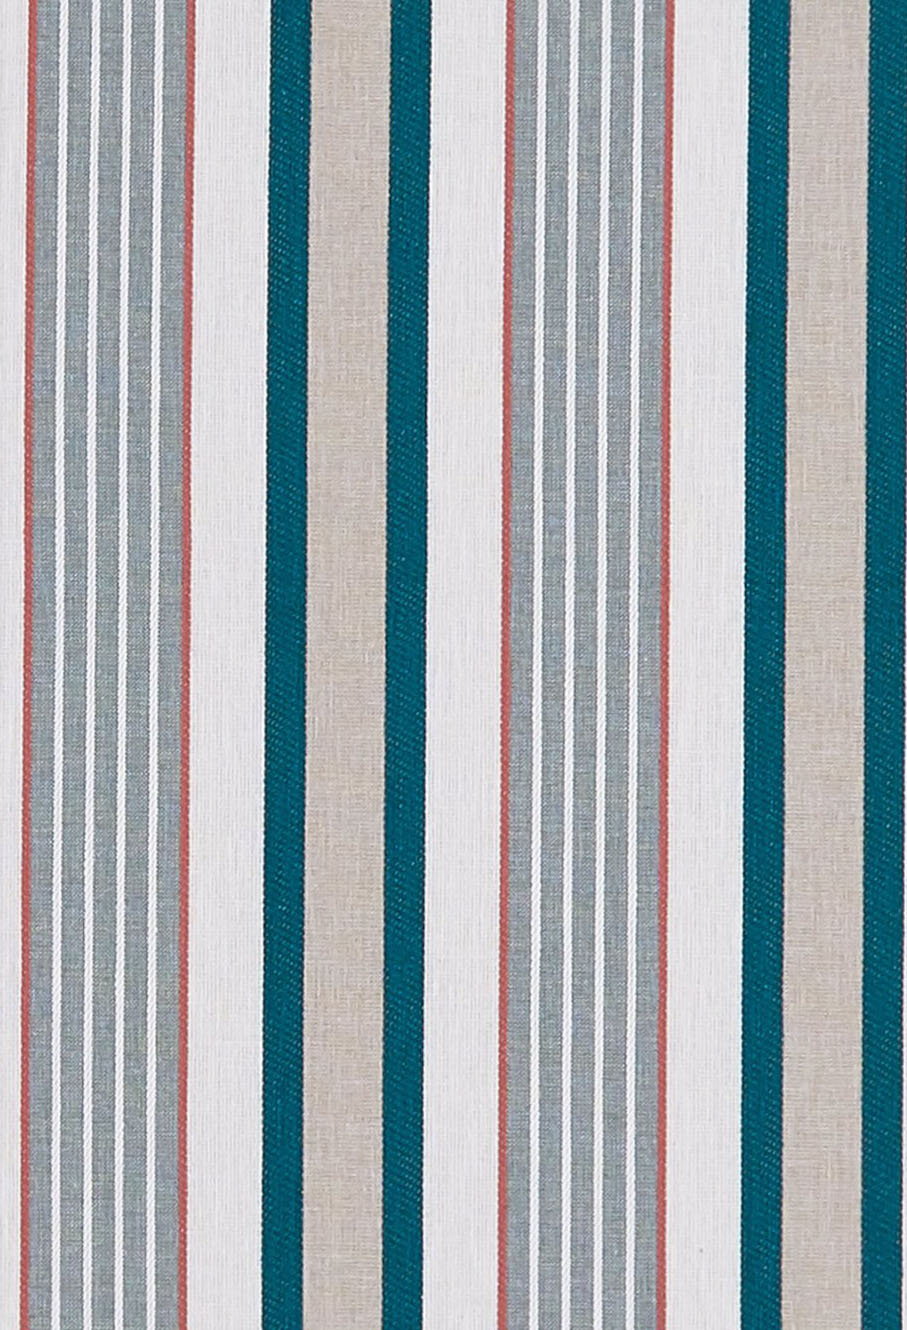 A photo of the curtain fabric.